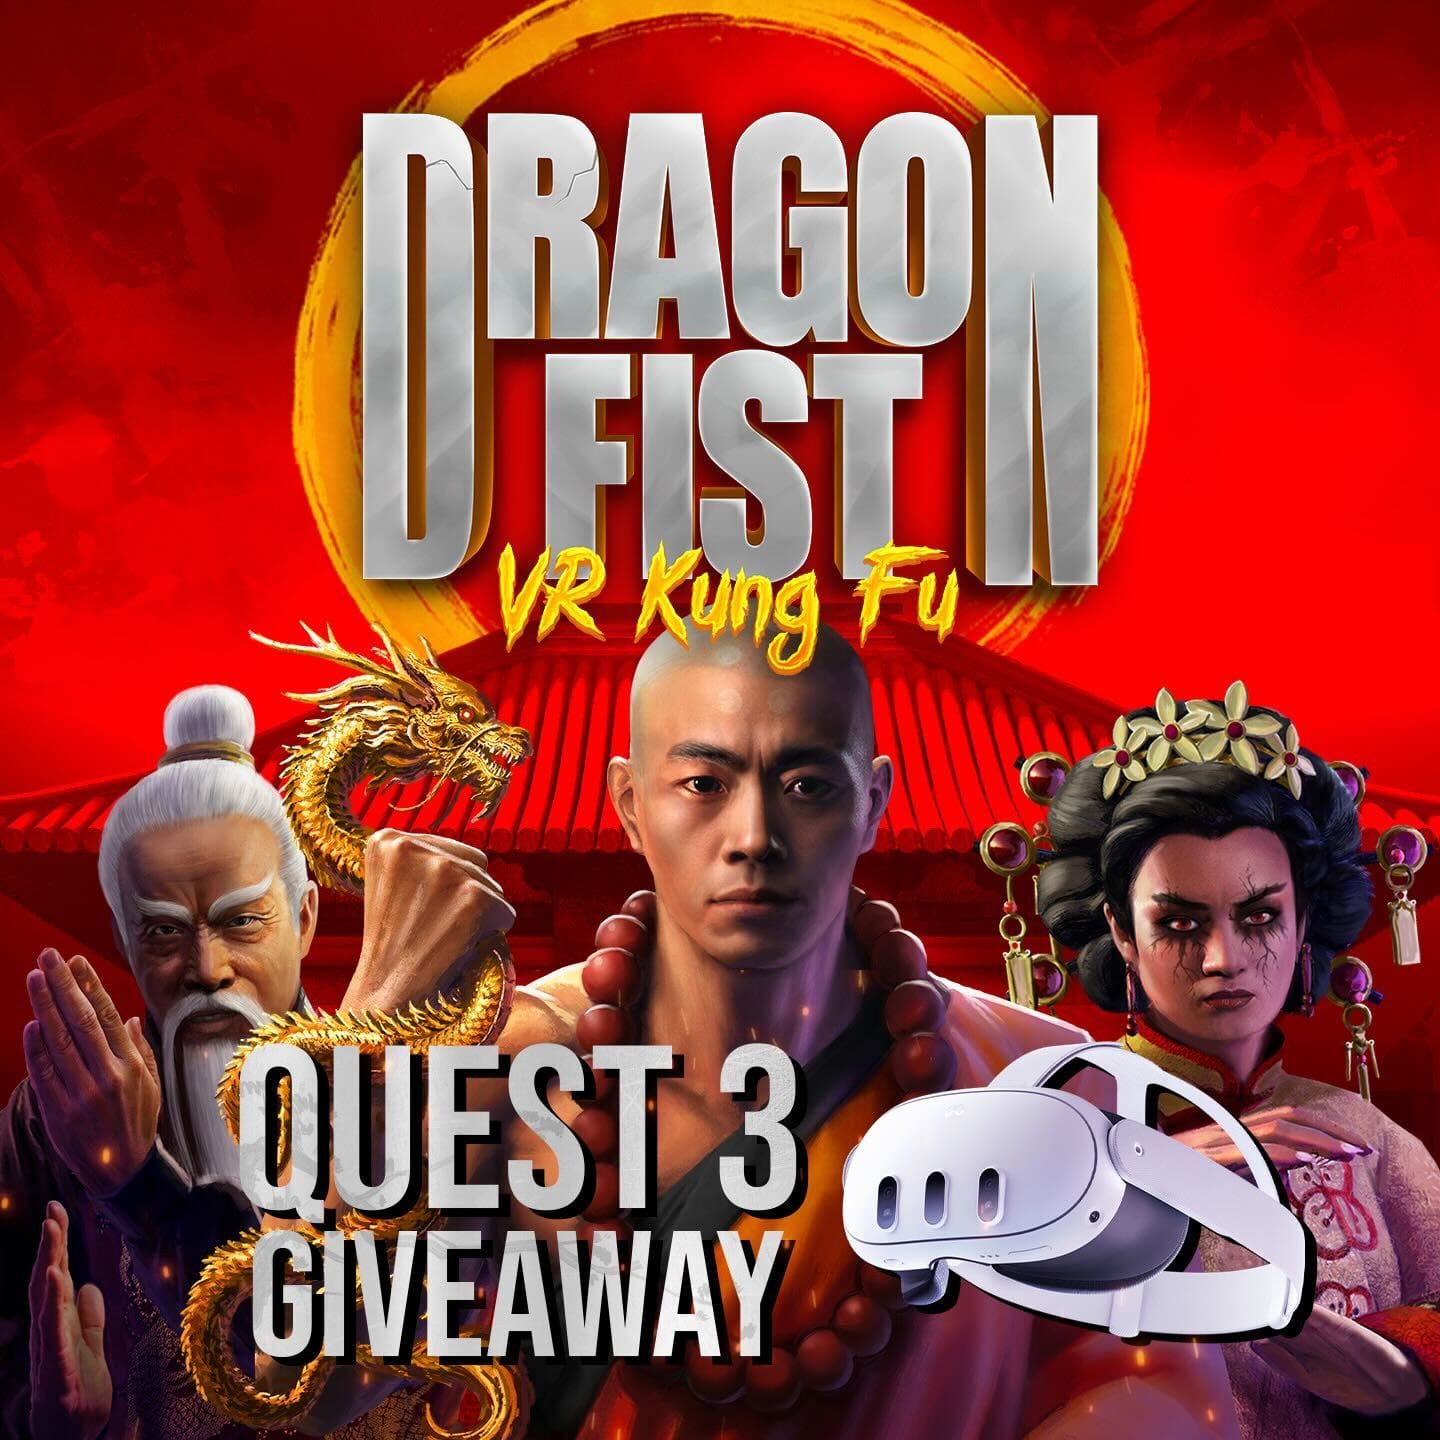 Win a Quest 3 VR Headset